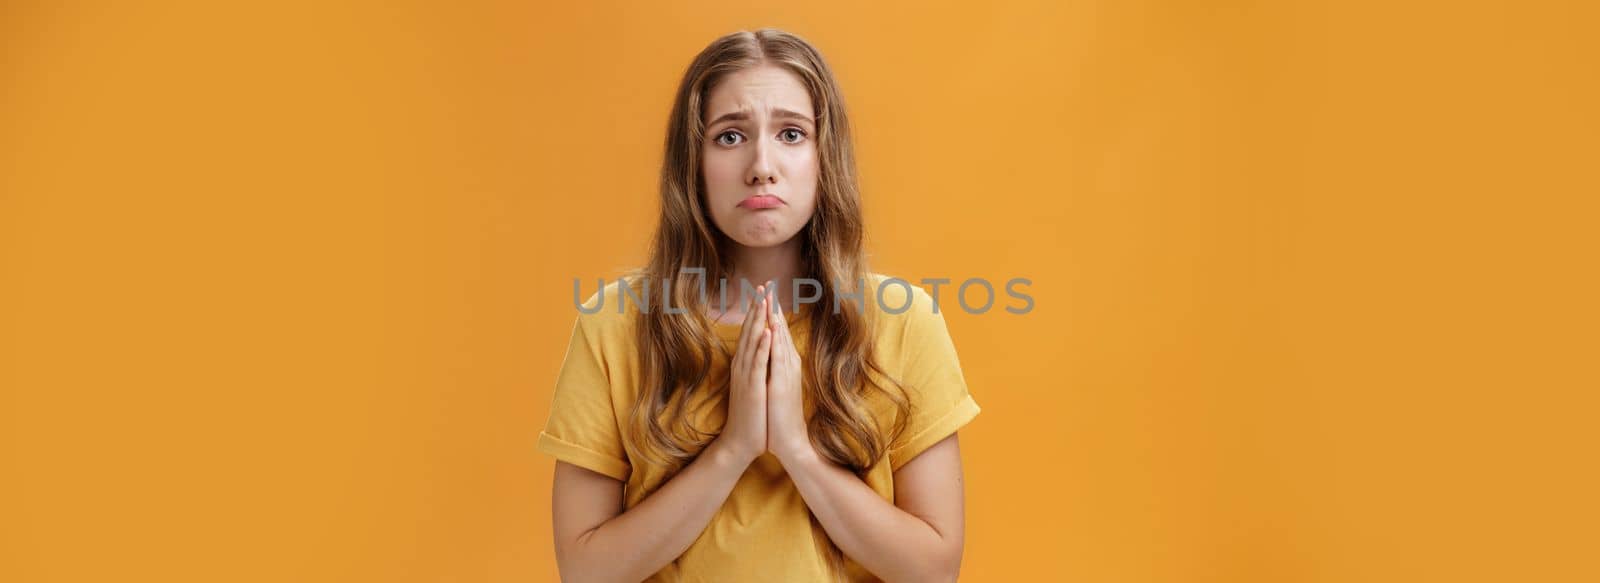 Silly girl needs help begging with hopeful puppy eyes holding hands in pray pouting and frowning feeling miserable stuck in bad situation standing upset over orange background, borrowing money by Benzoix